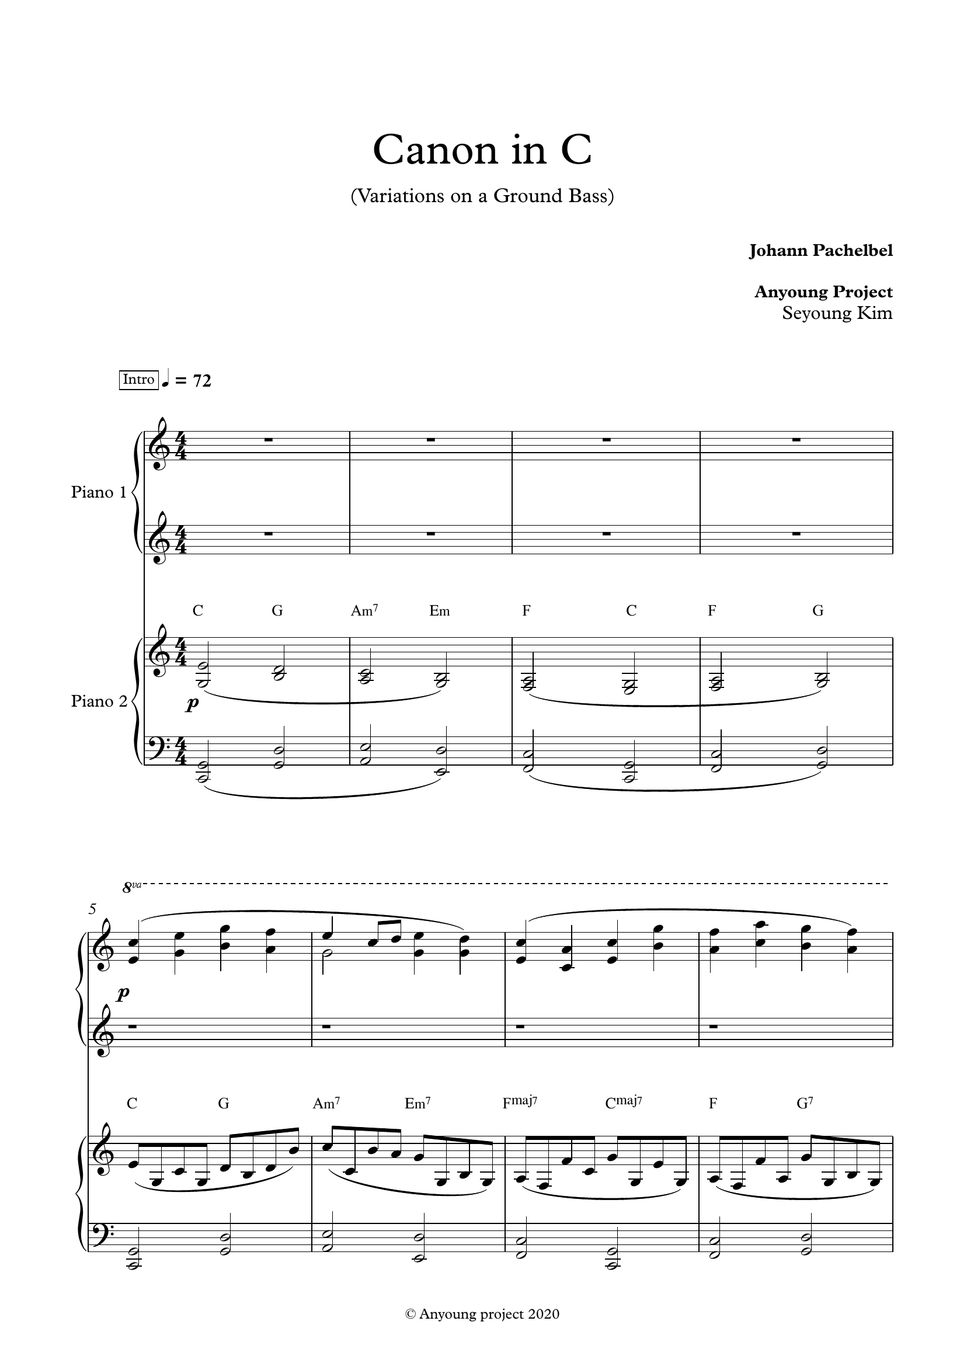 Pachelbel - Canon in C Sheet by Anyoung Project